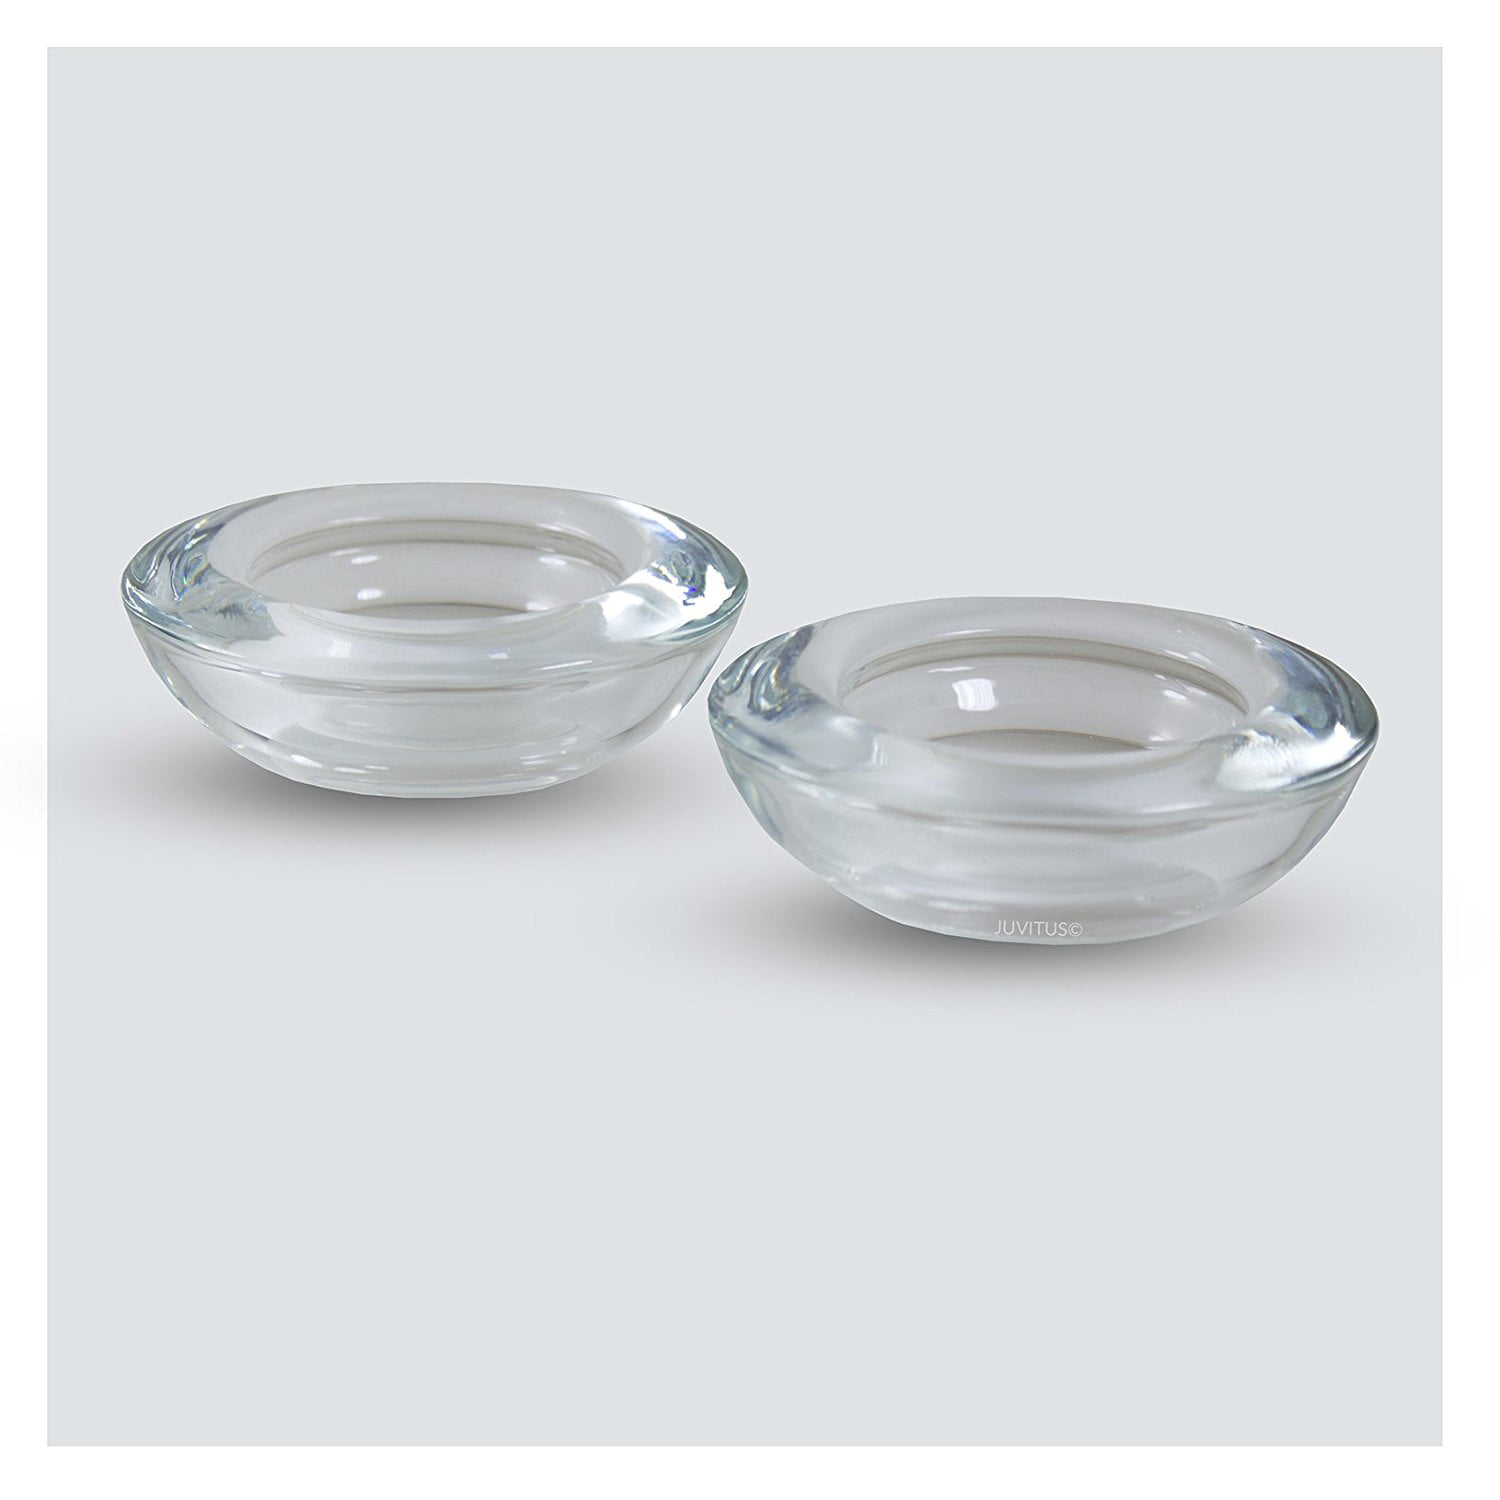 Round Clear Thick Glass Candle Holders Perfect For Tea Light And Standard Votive Candles 2